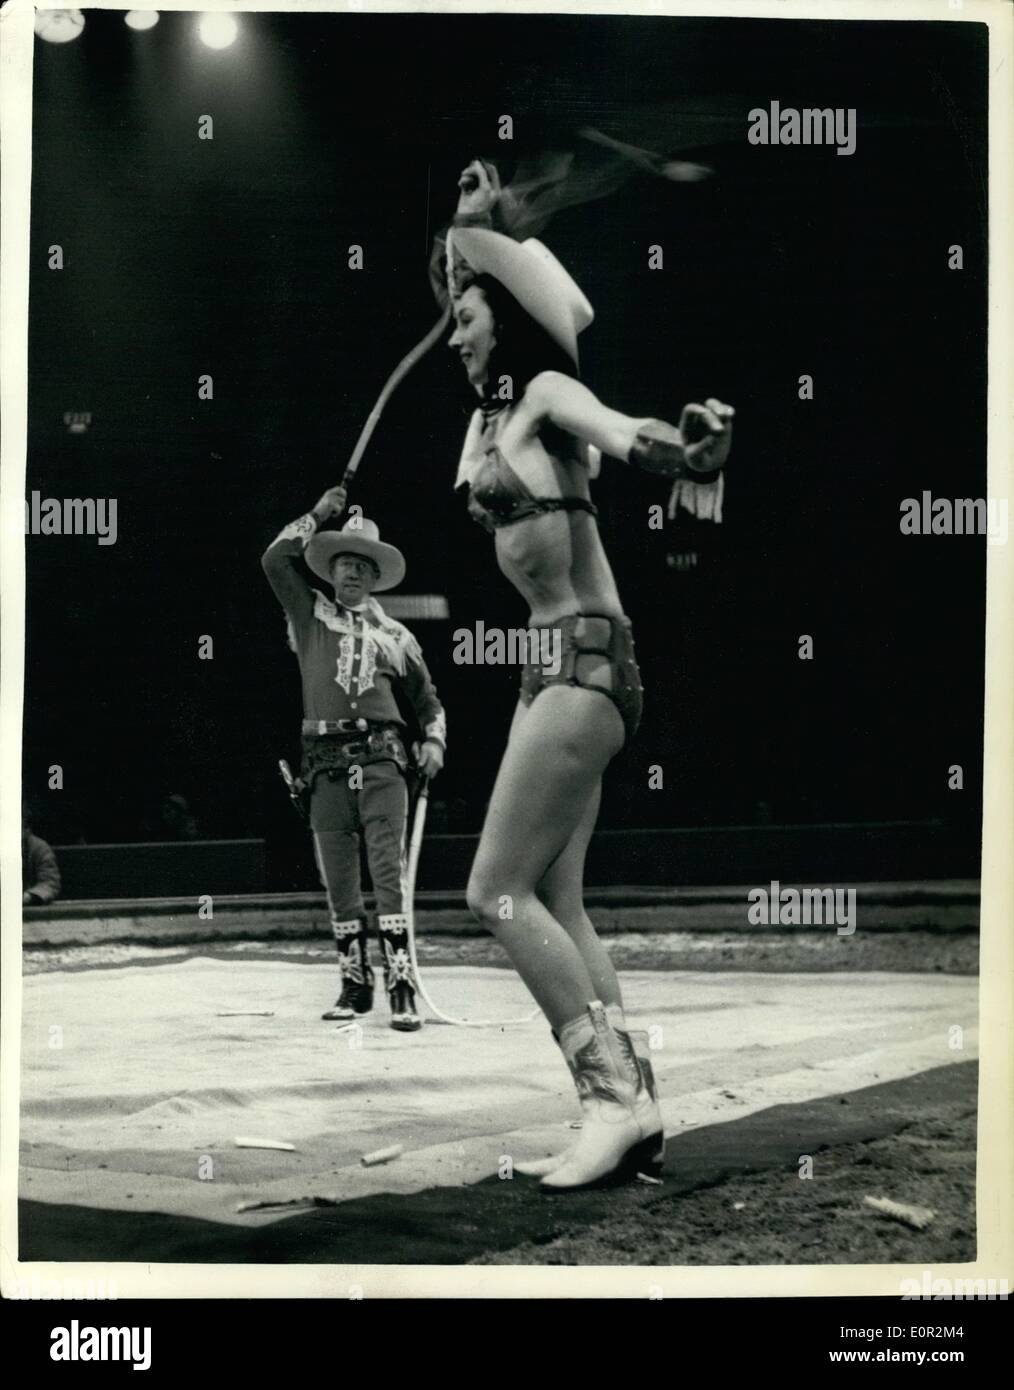 Dec. 12, 1957 - Olympia Circus Rehearsal. The ''Whip Cracking'' Act. Keystone Photo Shows: ''The Cordons'' - performing their whip cracking act - in which a match held by the girl is set alight by the whip - followed by the flicking away of a cigarette held in her lips... Seen during rehearsing at Olympia of the Bertram Mills Christmas Circus. Stock Photo